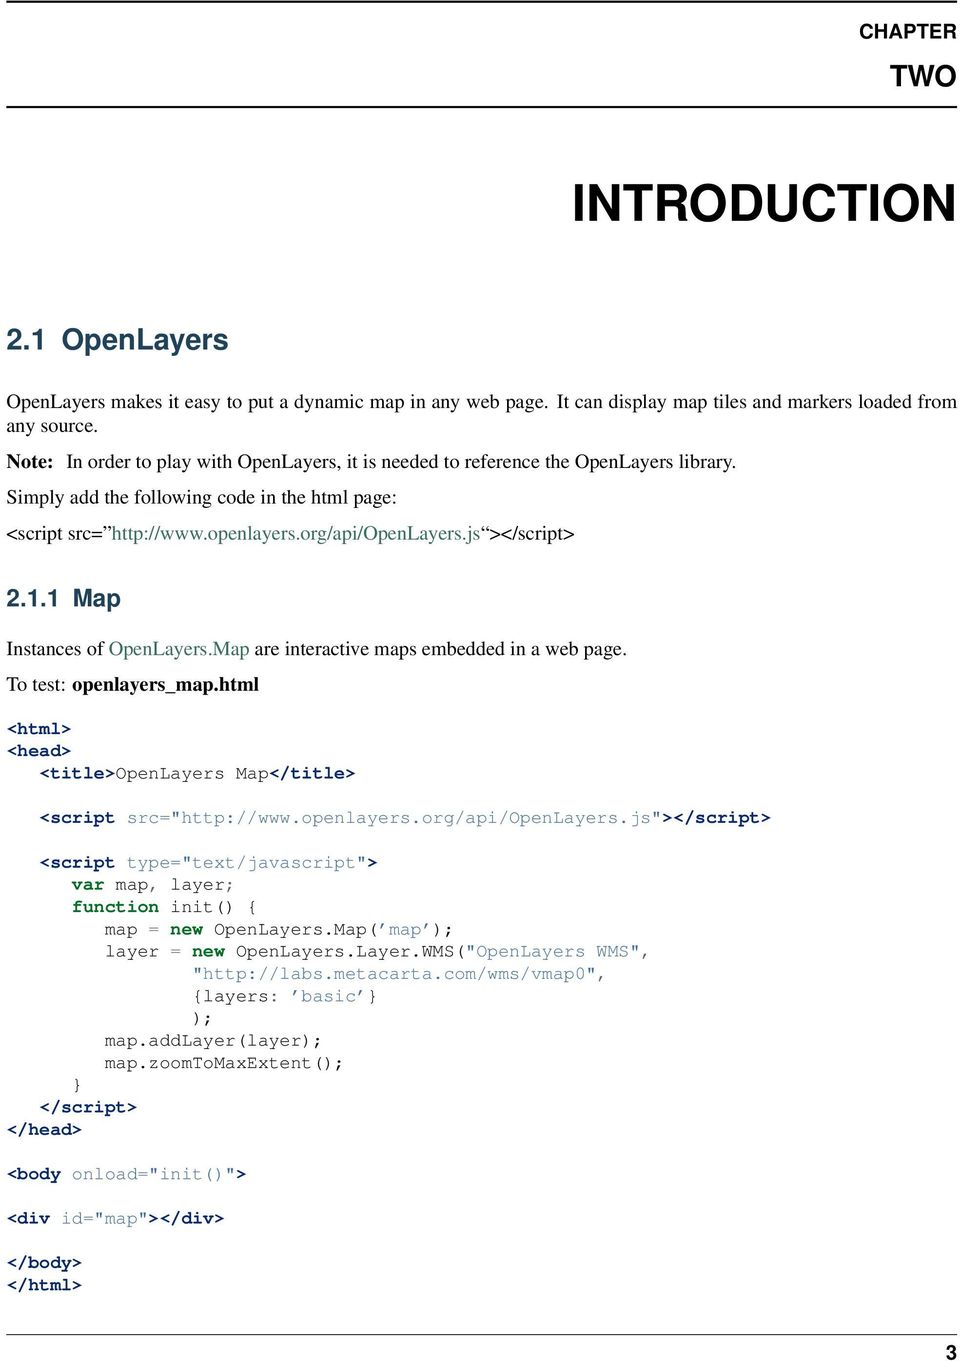 js ></script> 2.1.1 Map Instances of OpenLayers.Map are interactive maps embedded in a web page. To test: openlayers_map.html <html> <head> <title>openlayers Map</title> <script src="http://www.